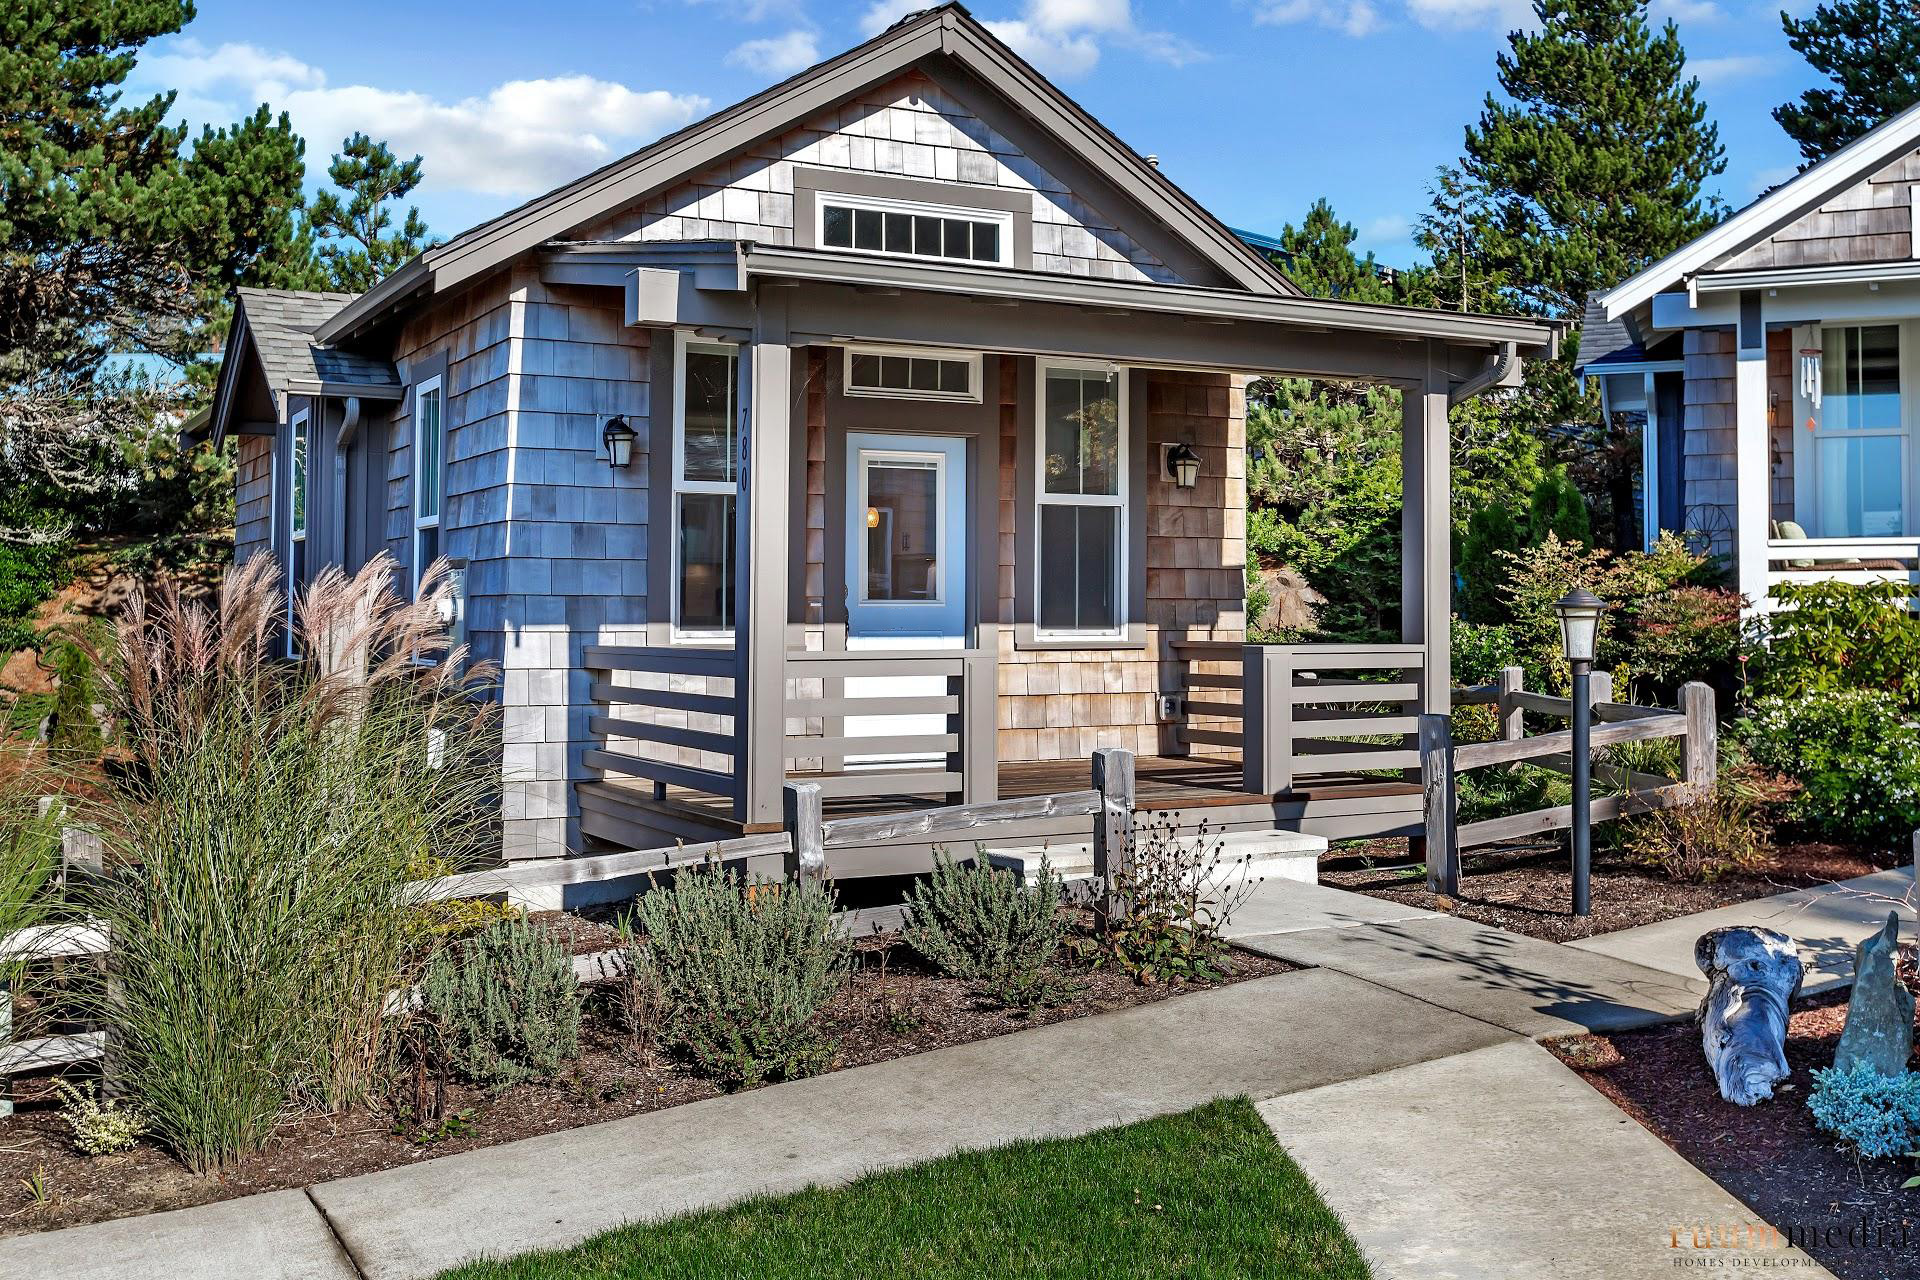 Just Listed! Modern Tiny Home in Manzanita